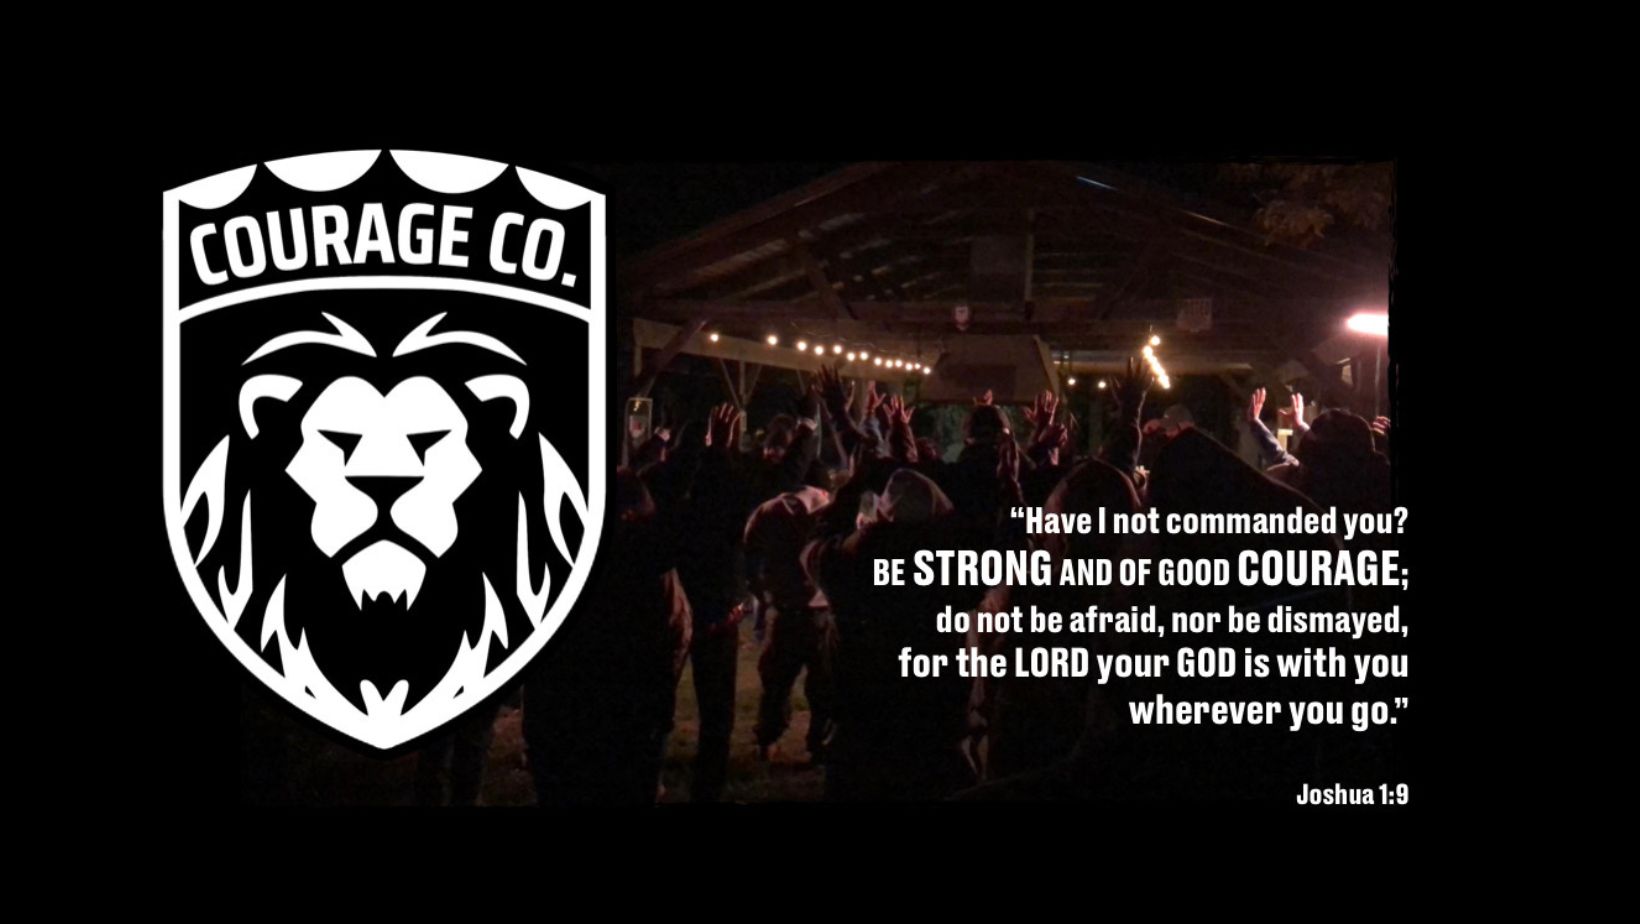 Courage Co. Men's Ministry